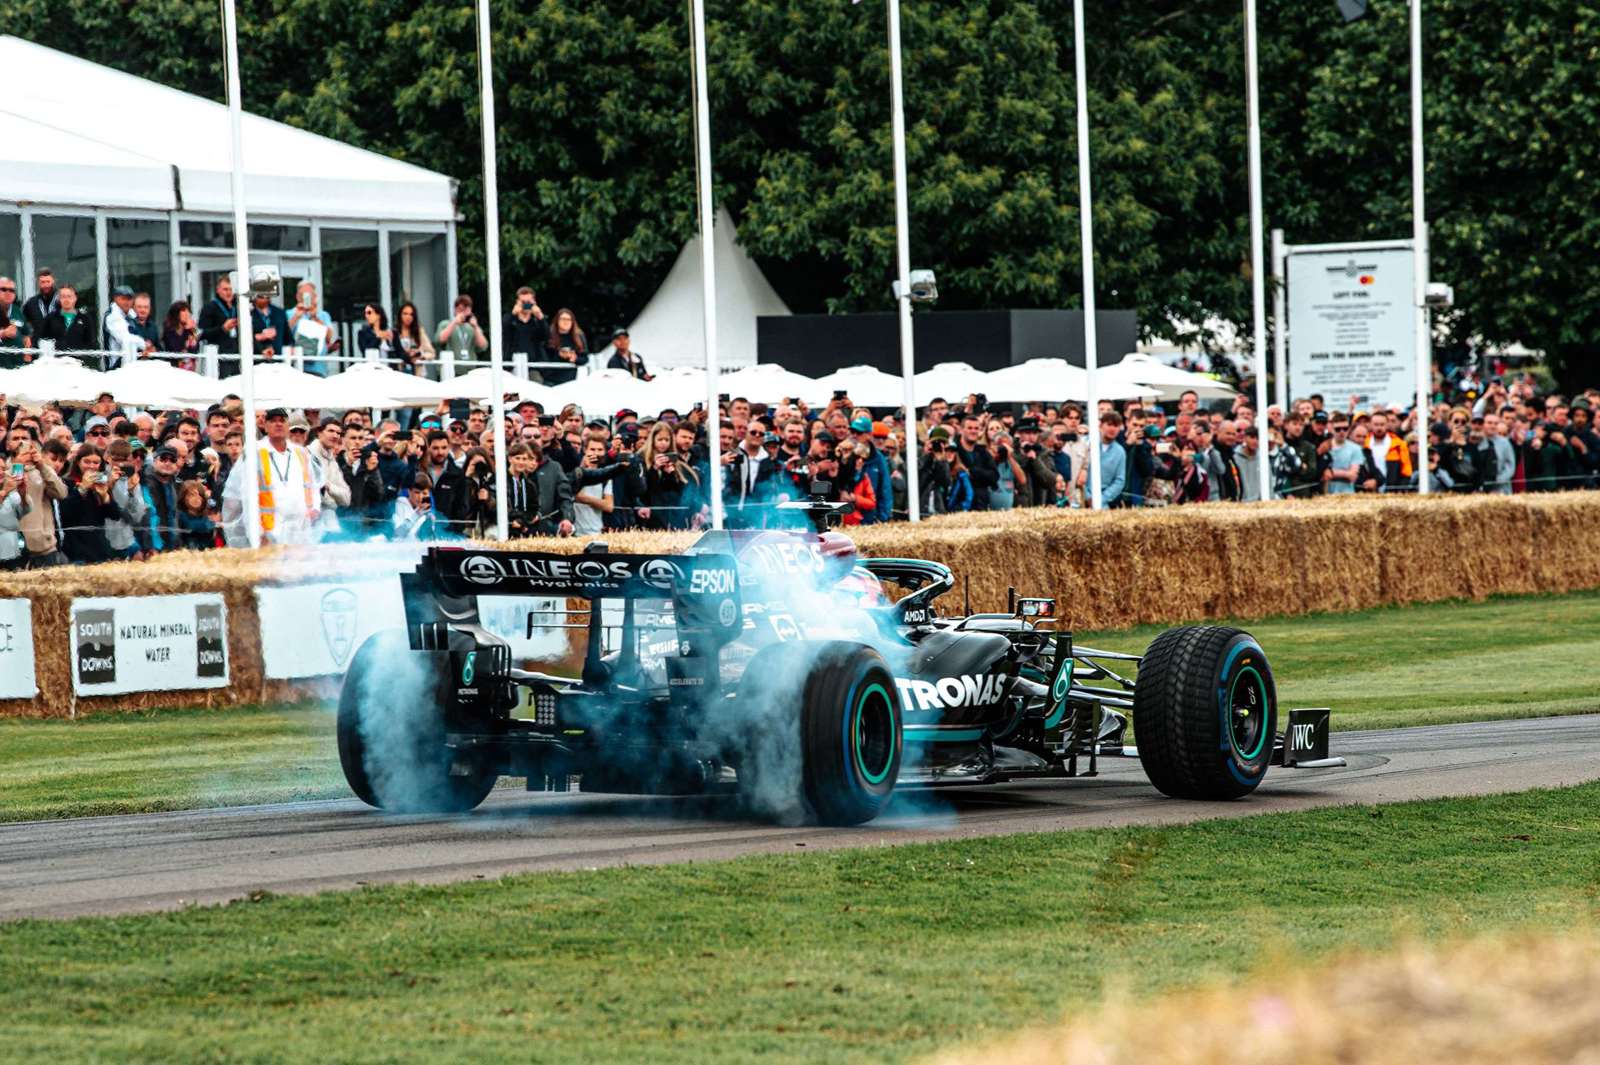 2022 Goodwood Festival of Speed, Revival and Members' Meeting dates | GRR